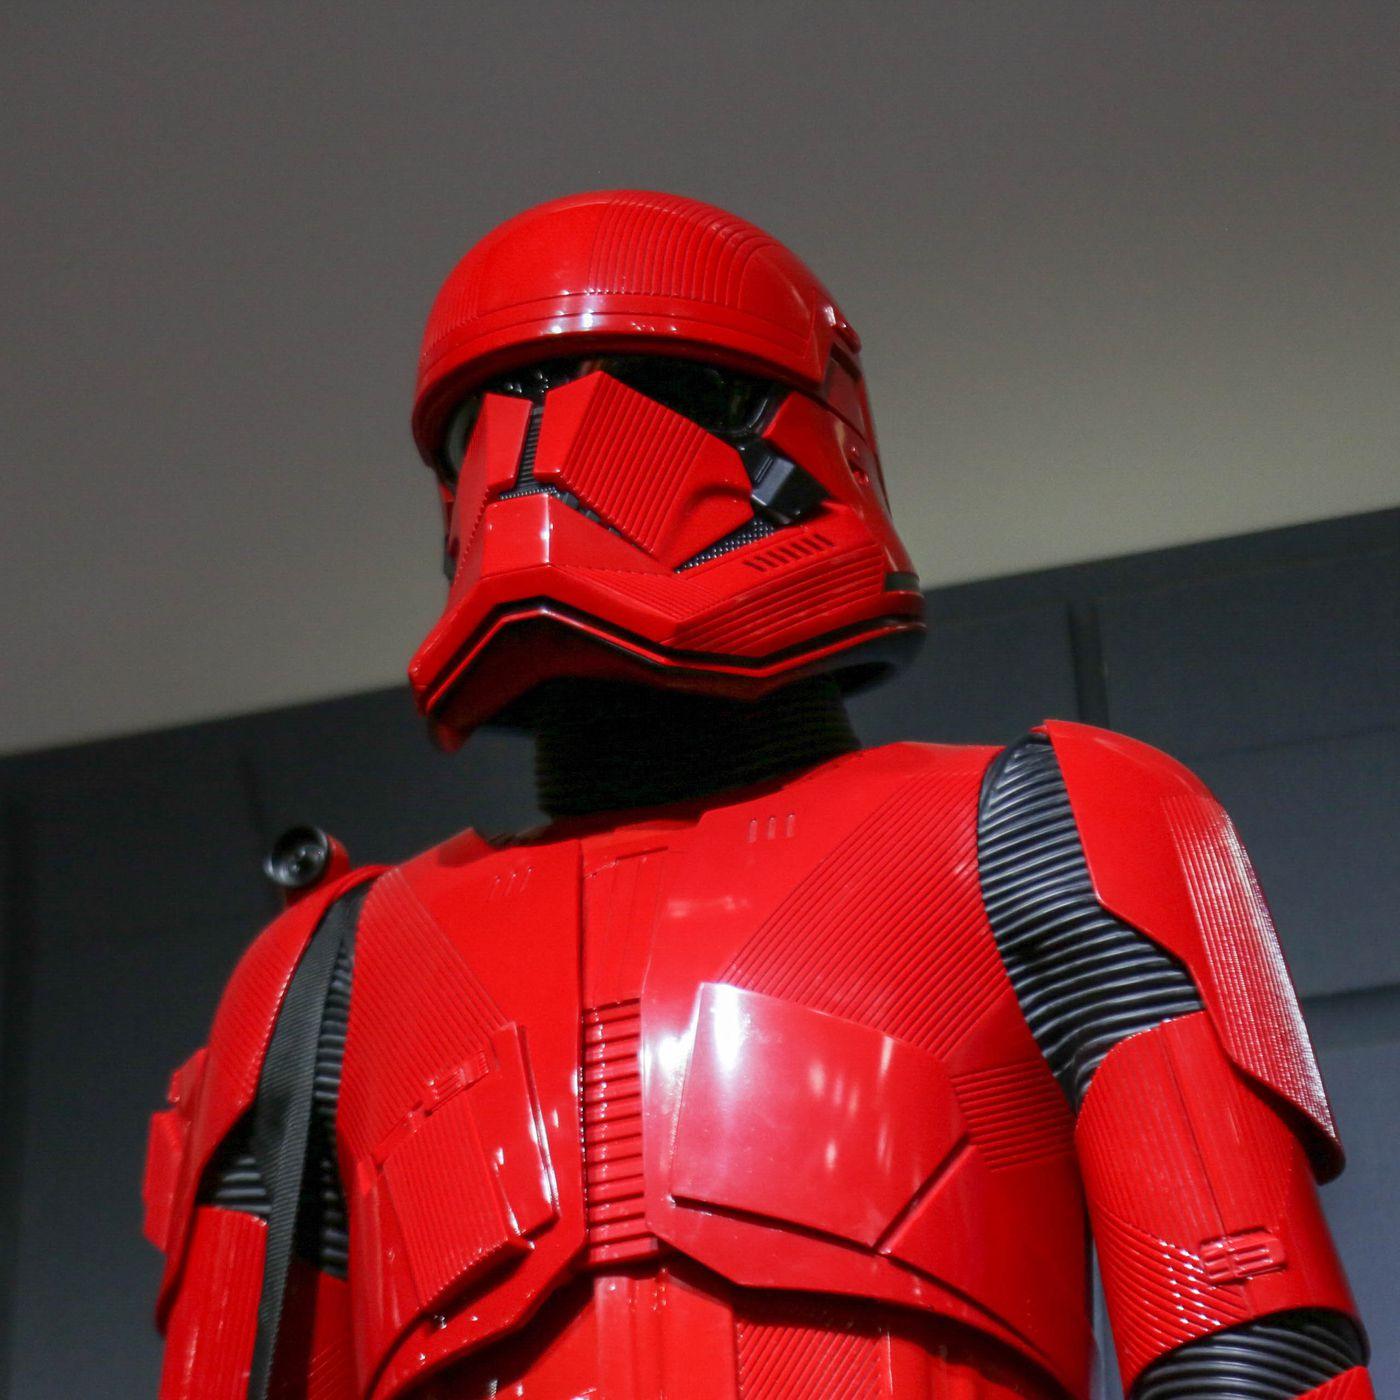 Life Sized Stormtroopers Invade Comic Con Ahead Of Star Wars